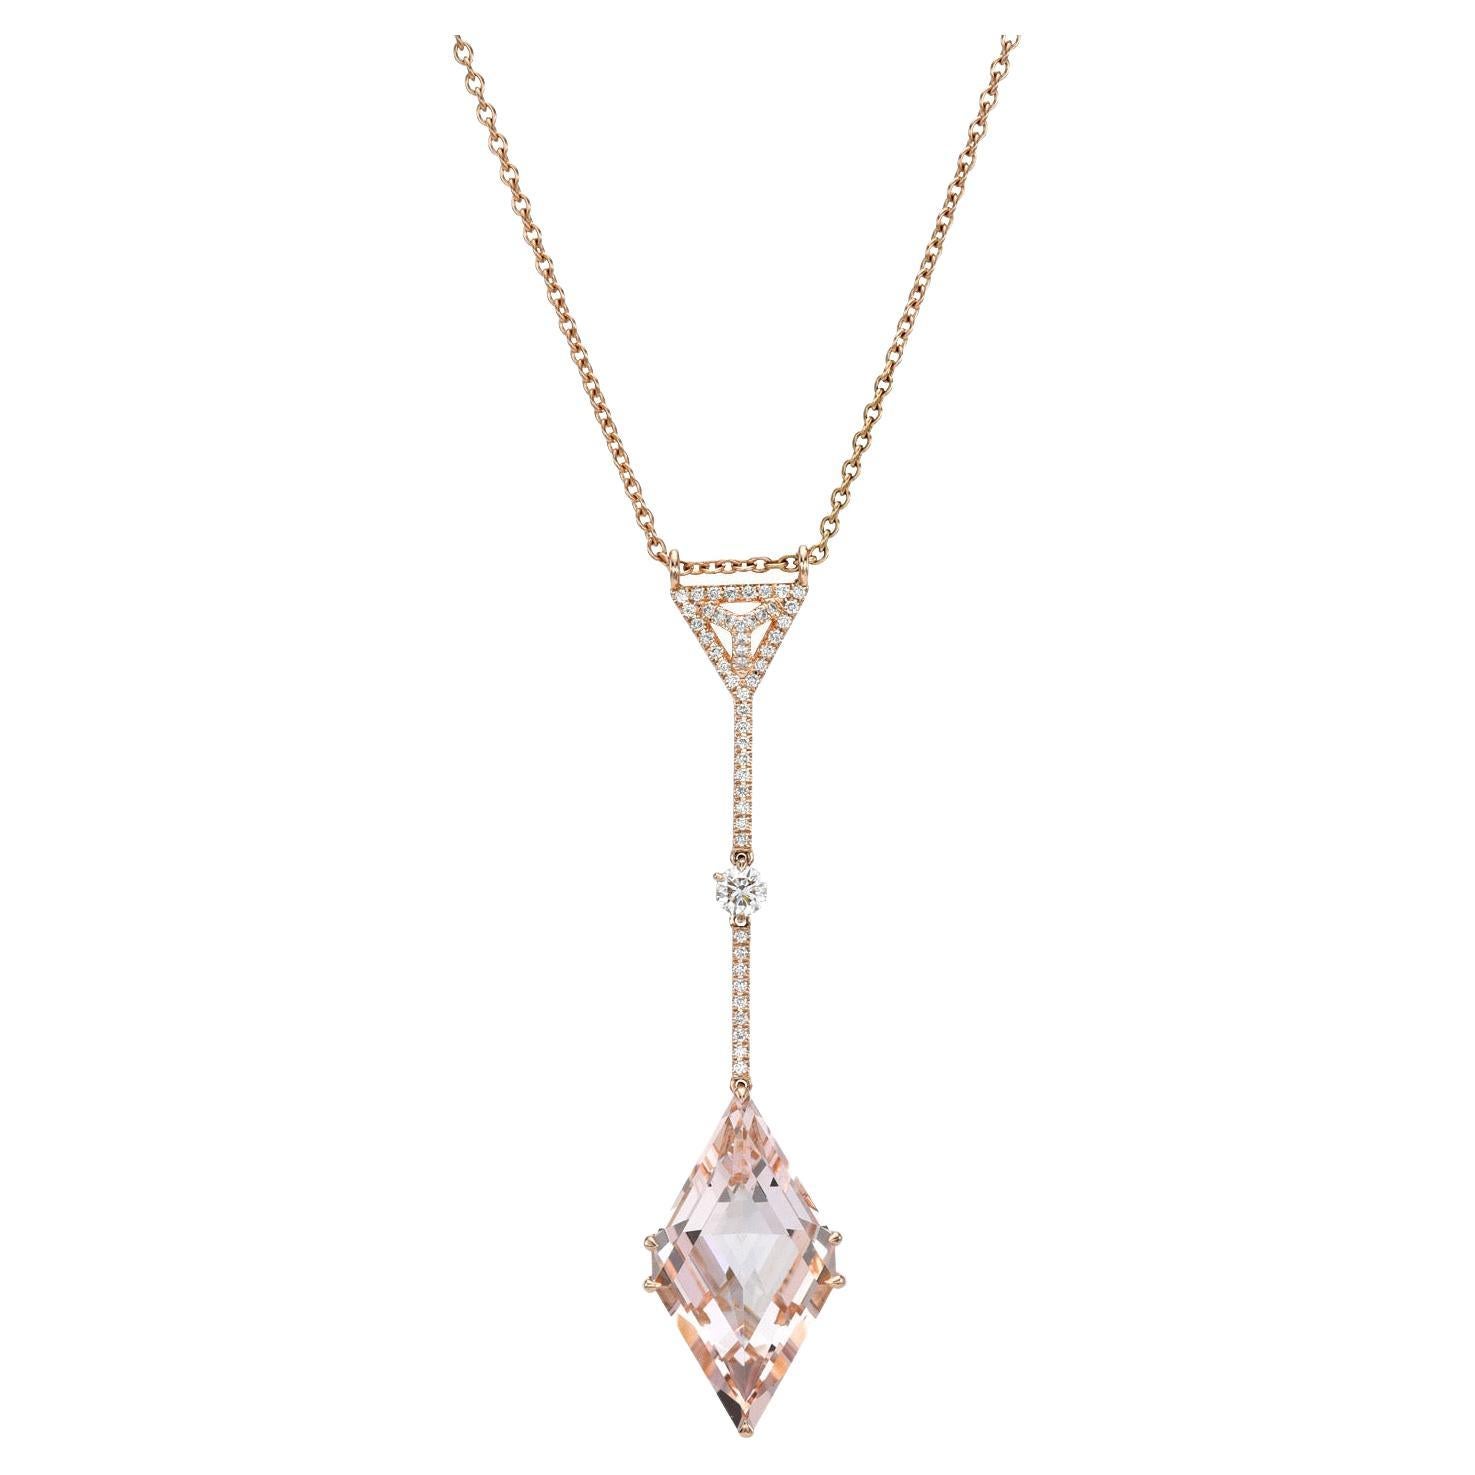 Exclusive 7.66 carat Morganite Kite, 18K rose gold necklace, suspending from a 0.16 carat three dimensional signature Merkaba diamond triangle, and a single round diamond weighing a total of 0.15 carats.
Total length of the necklace can be enjoyed